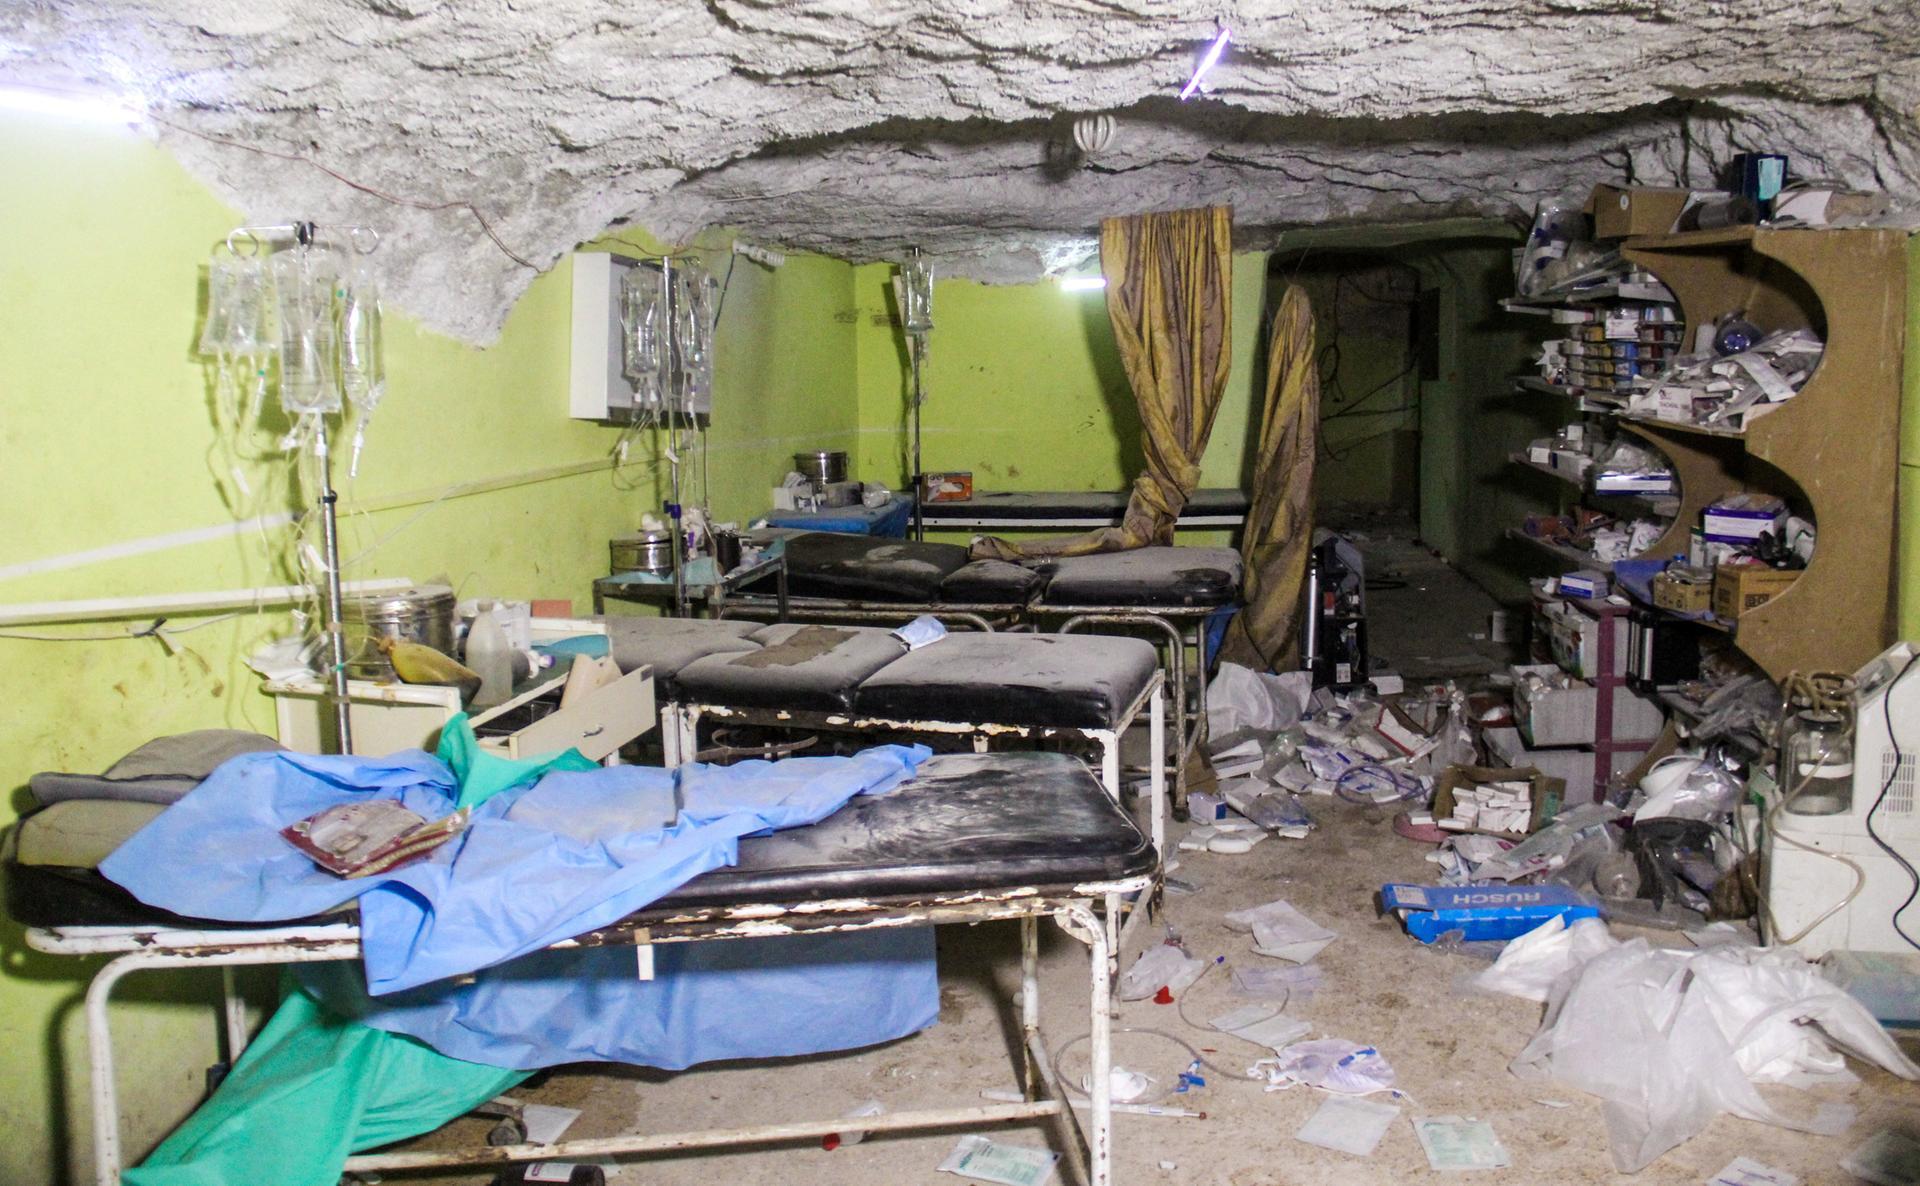 A picture taken on April 4, 2017 shows destruction at a hospital room in Khan Sheikhun, a rebel-held town in the northwestern Syrian Idlib province, following a suspected toxic gas attack. - A suspected chemical attack killed dozens of civilians including several children in rebel-held northwestern Syria, a monitor said, with the opposition accusing the government and demanding a UN investigation. (Photo by Omar haj kadour / AFP)